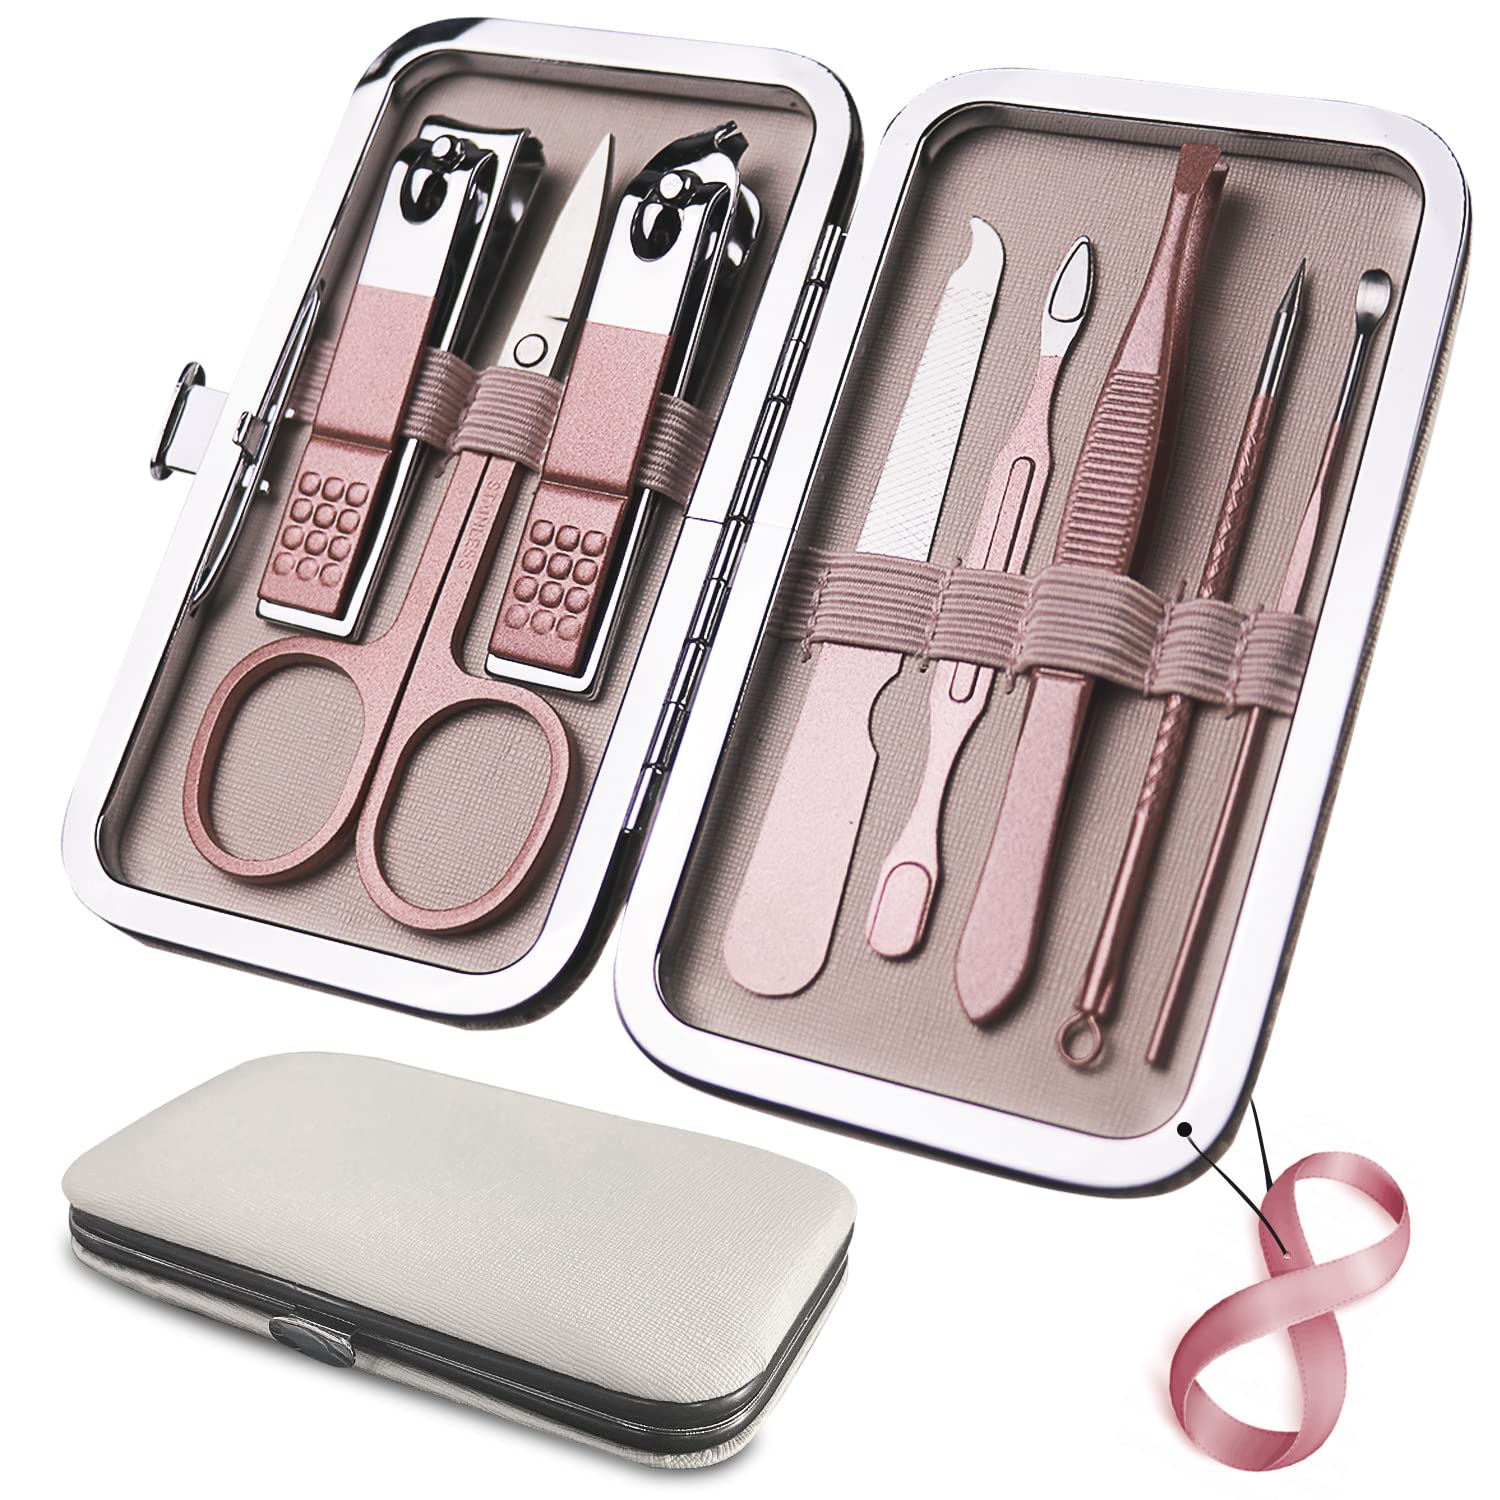  Manicure Set Nail Clippers Pedicure Kit, 8 In 1